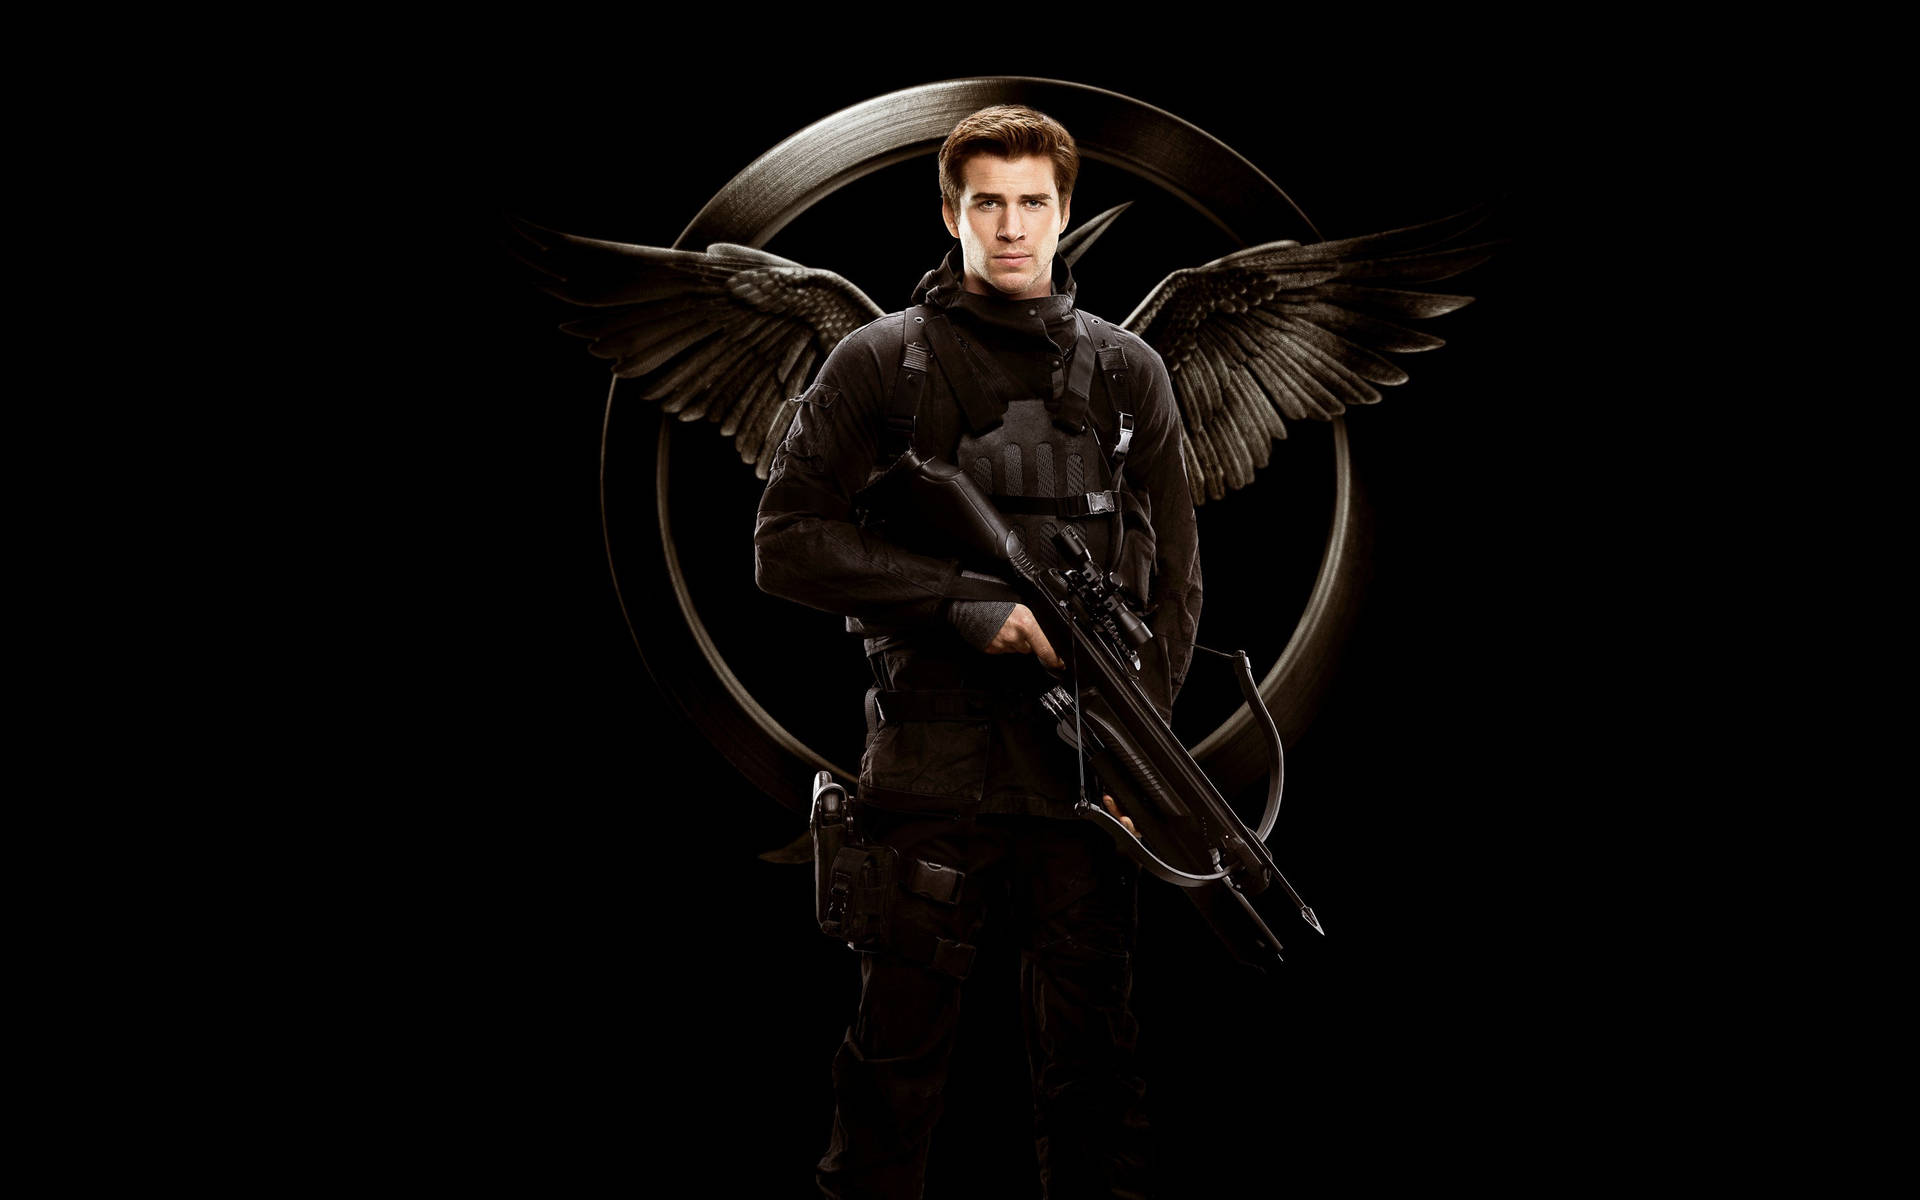 The Hunger Games Gale Hawthorne Wallpaper